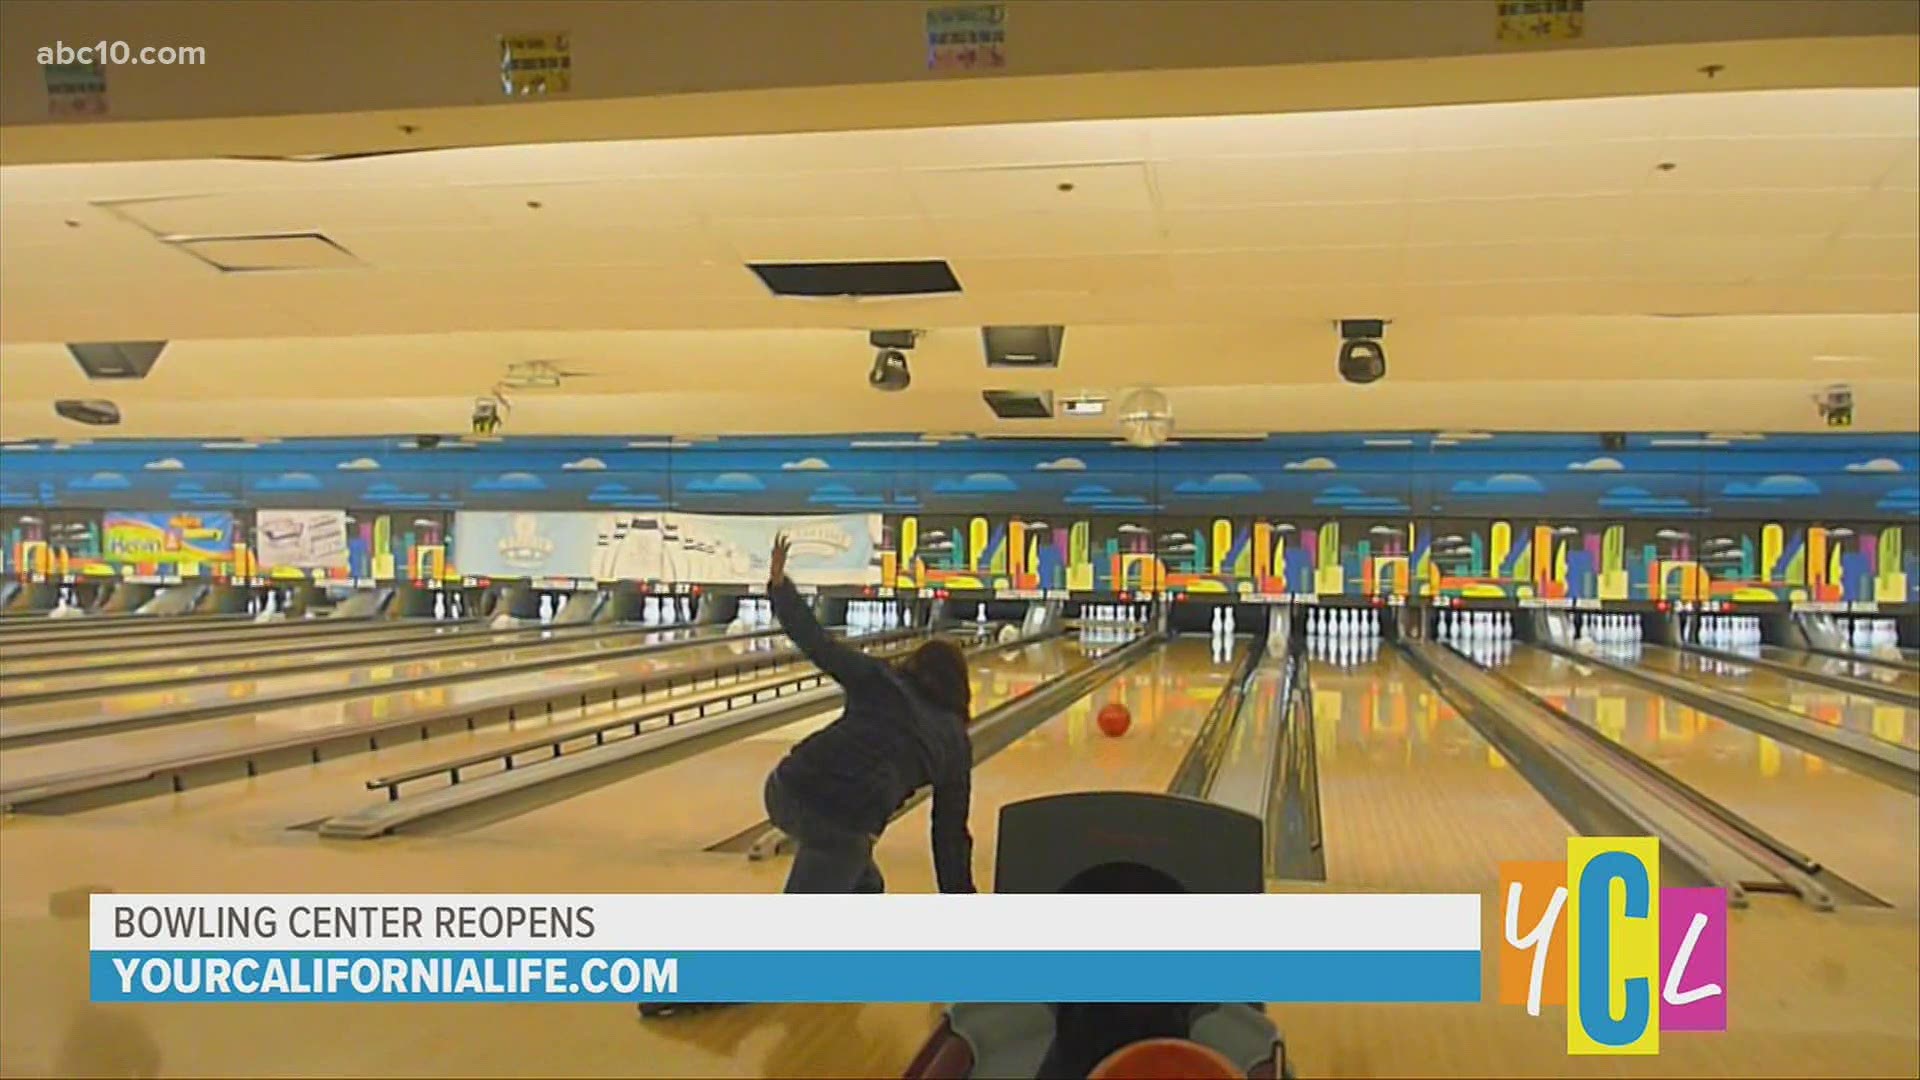 Bowling centers stay dark in California as a result of the pandemic, "Double Decker Lanes" owner Jim Decker tells us many bowling centers are now facing bankruptcy.